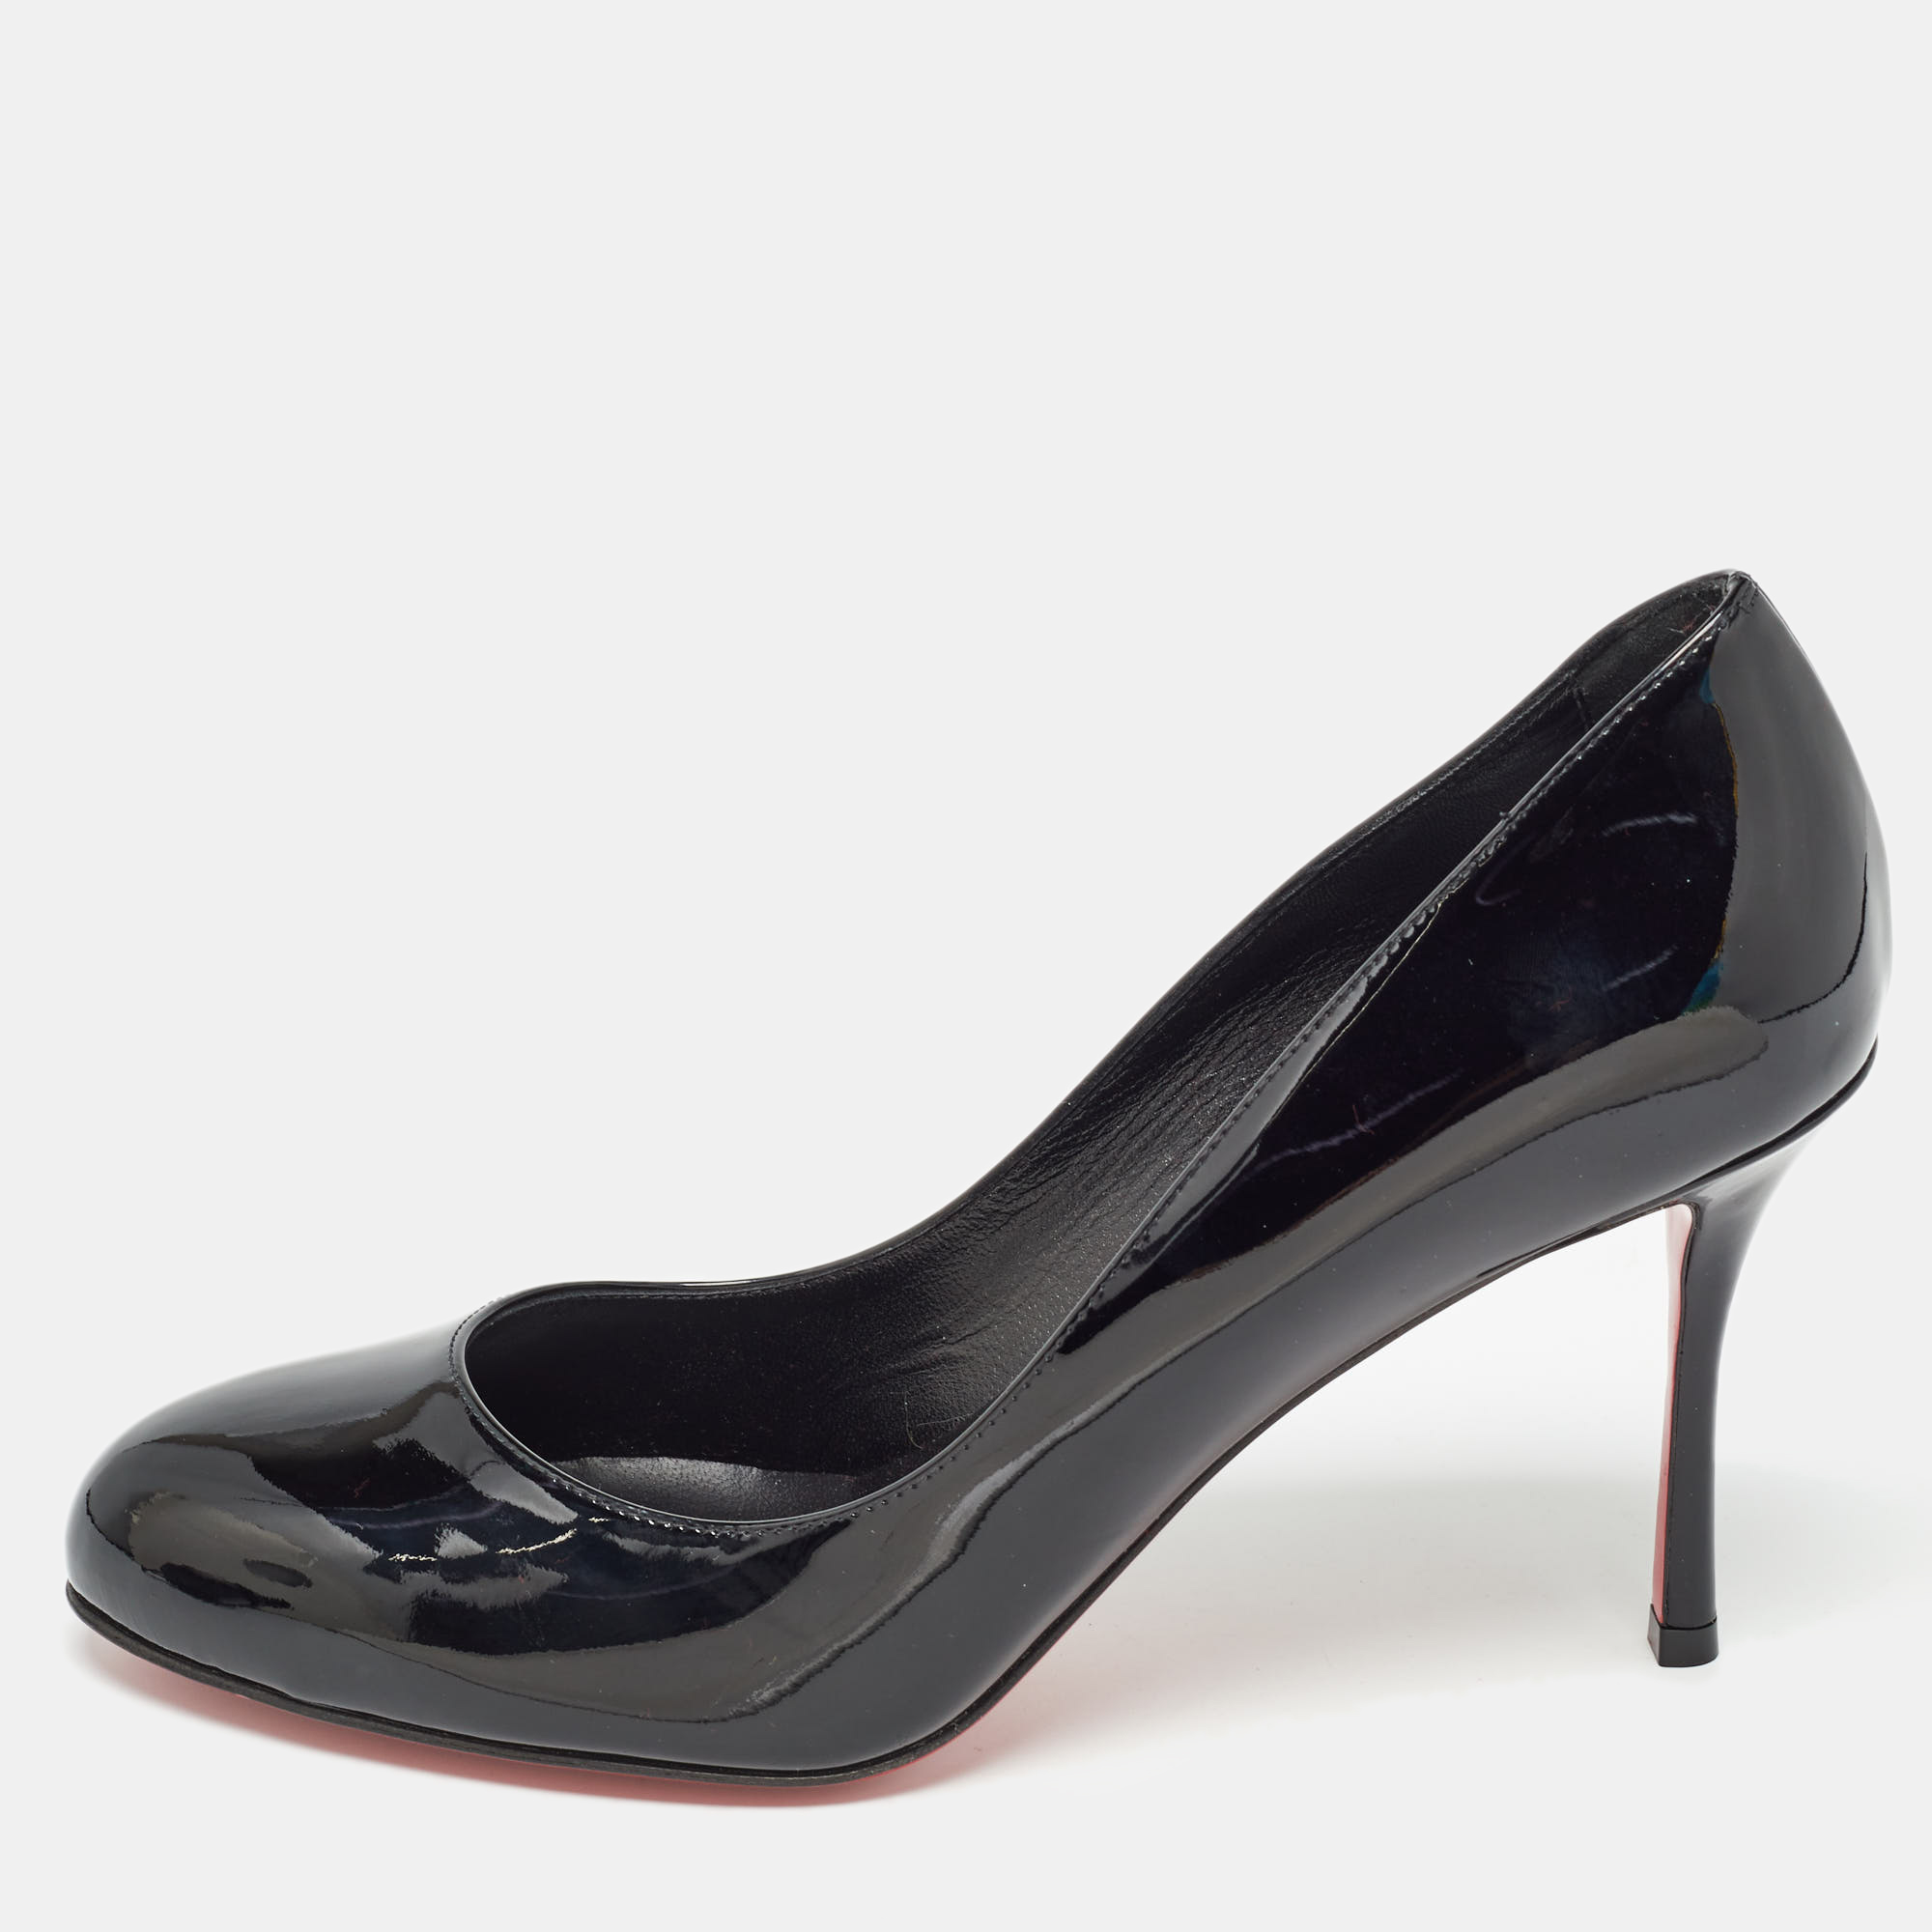 

Christian Louboutin Black Patent Leather Dolly Pumps Size